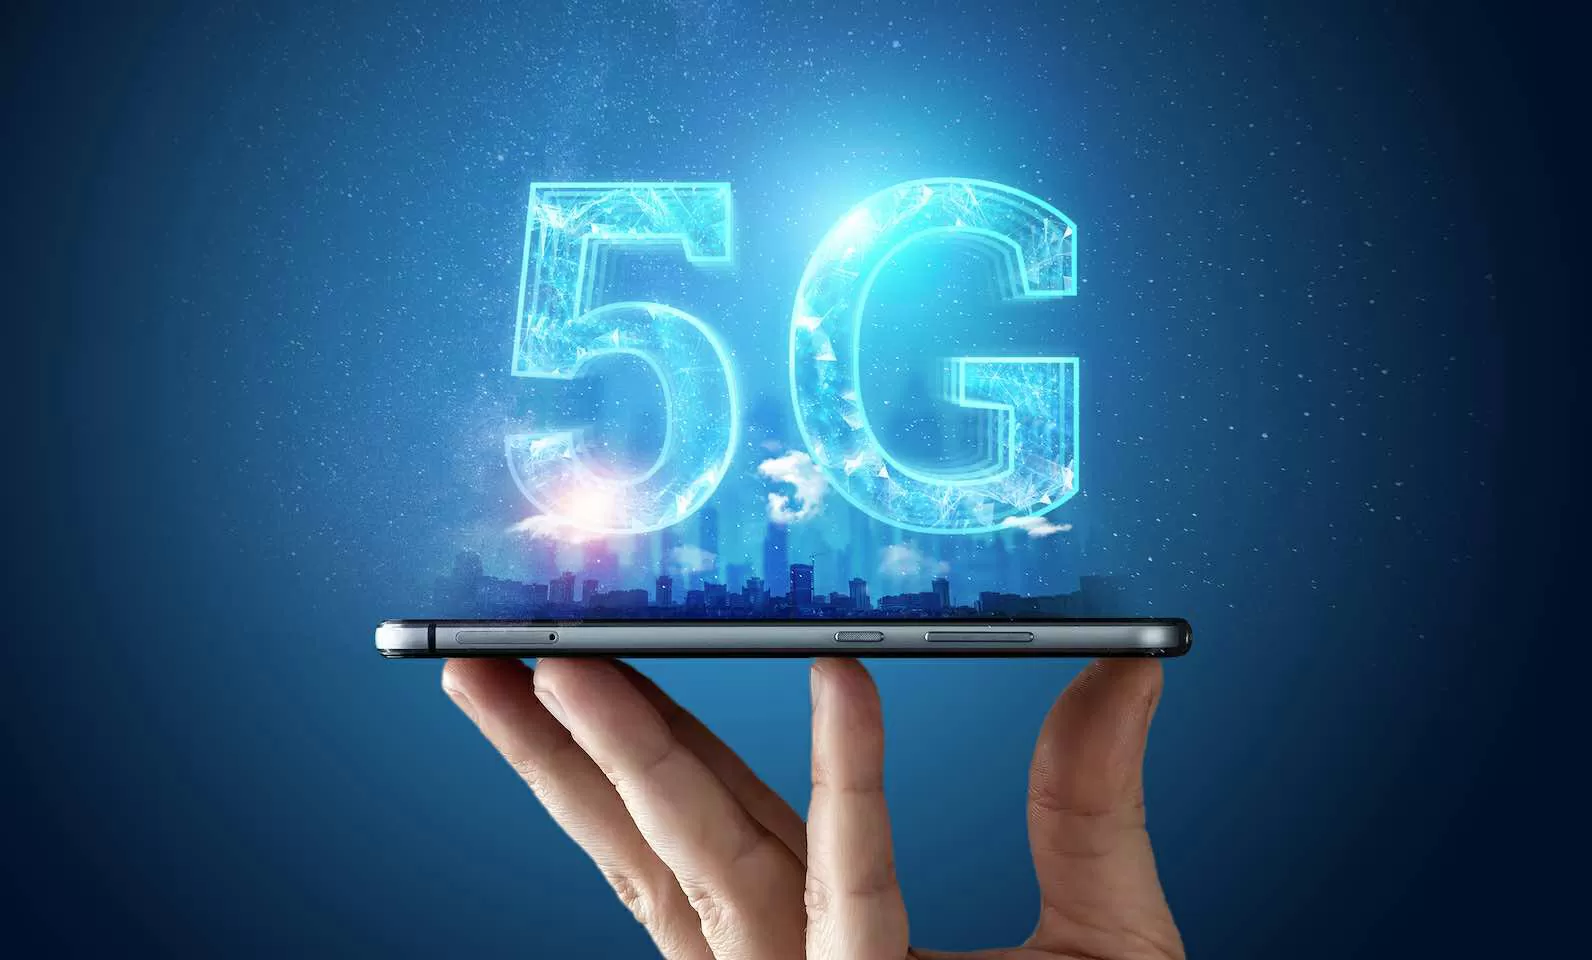 vivo working towards enabling seamless 5G experience Highest ranked standalone smartphone brand in 3GPP for contribution to 5G standards